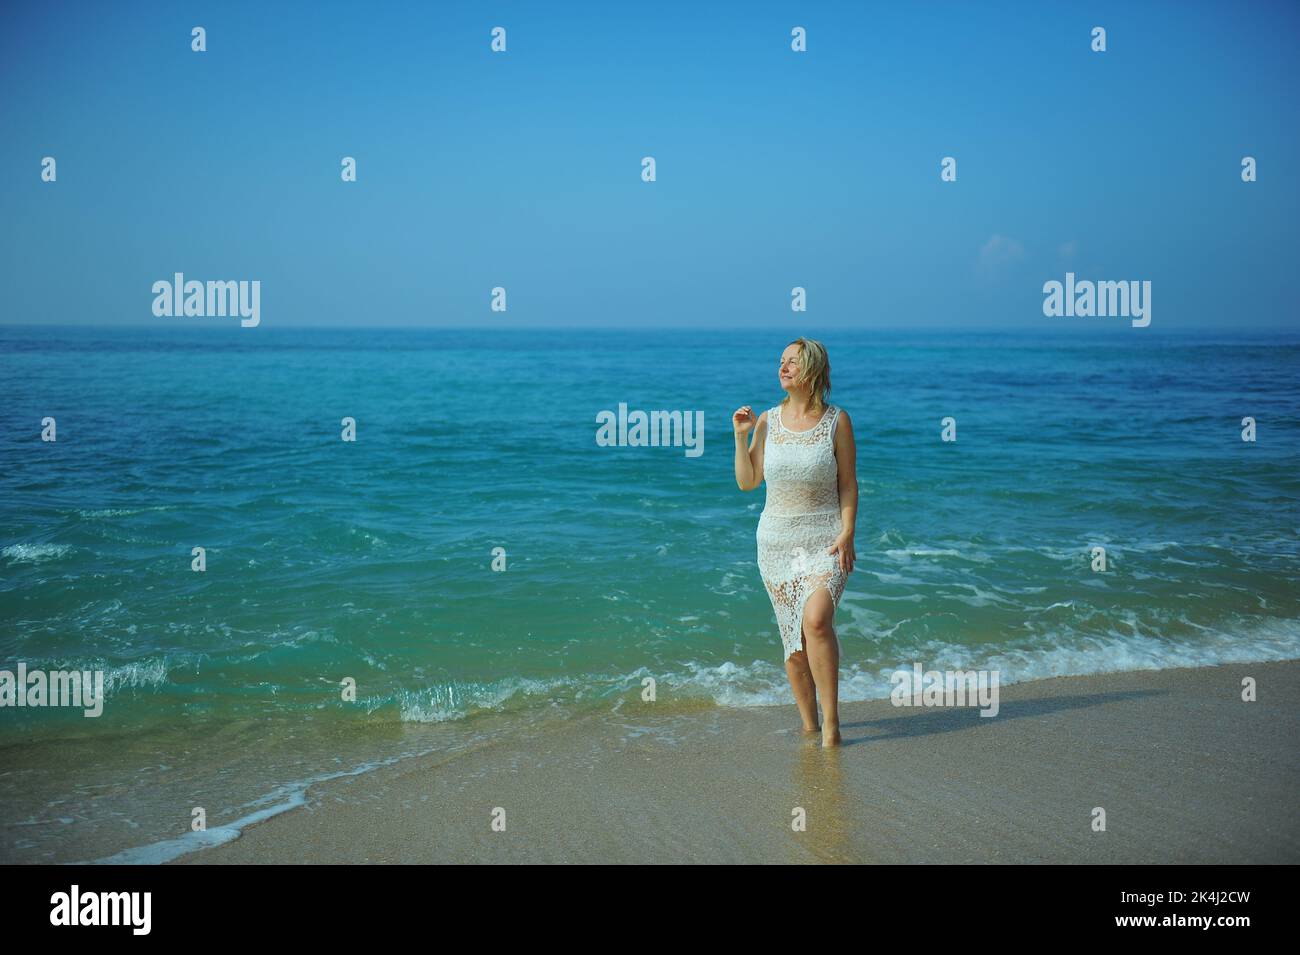 A woman of 30-40 years old in a white lace dress stands on the ocean, and waves of clear water reach her feet with a sea of different colors from turquoise to dark. High quality photo Stock Photo